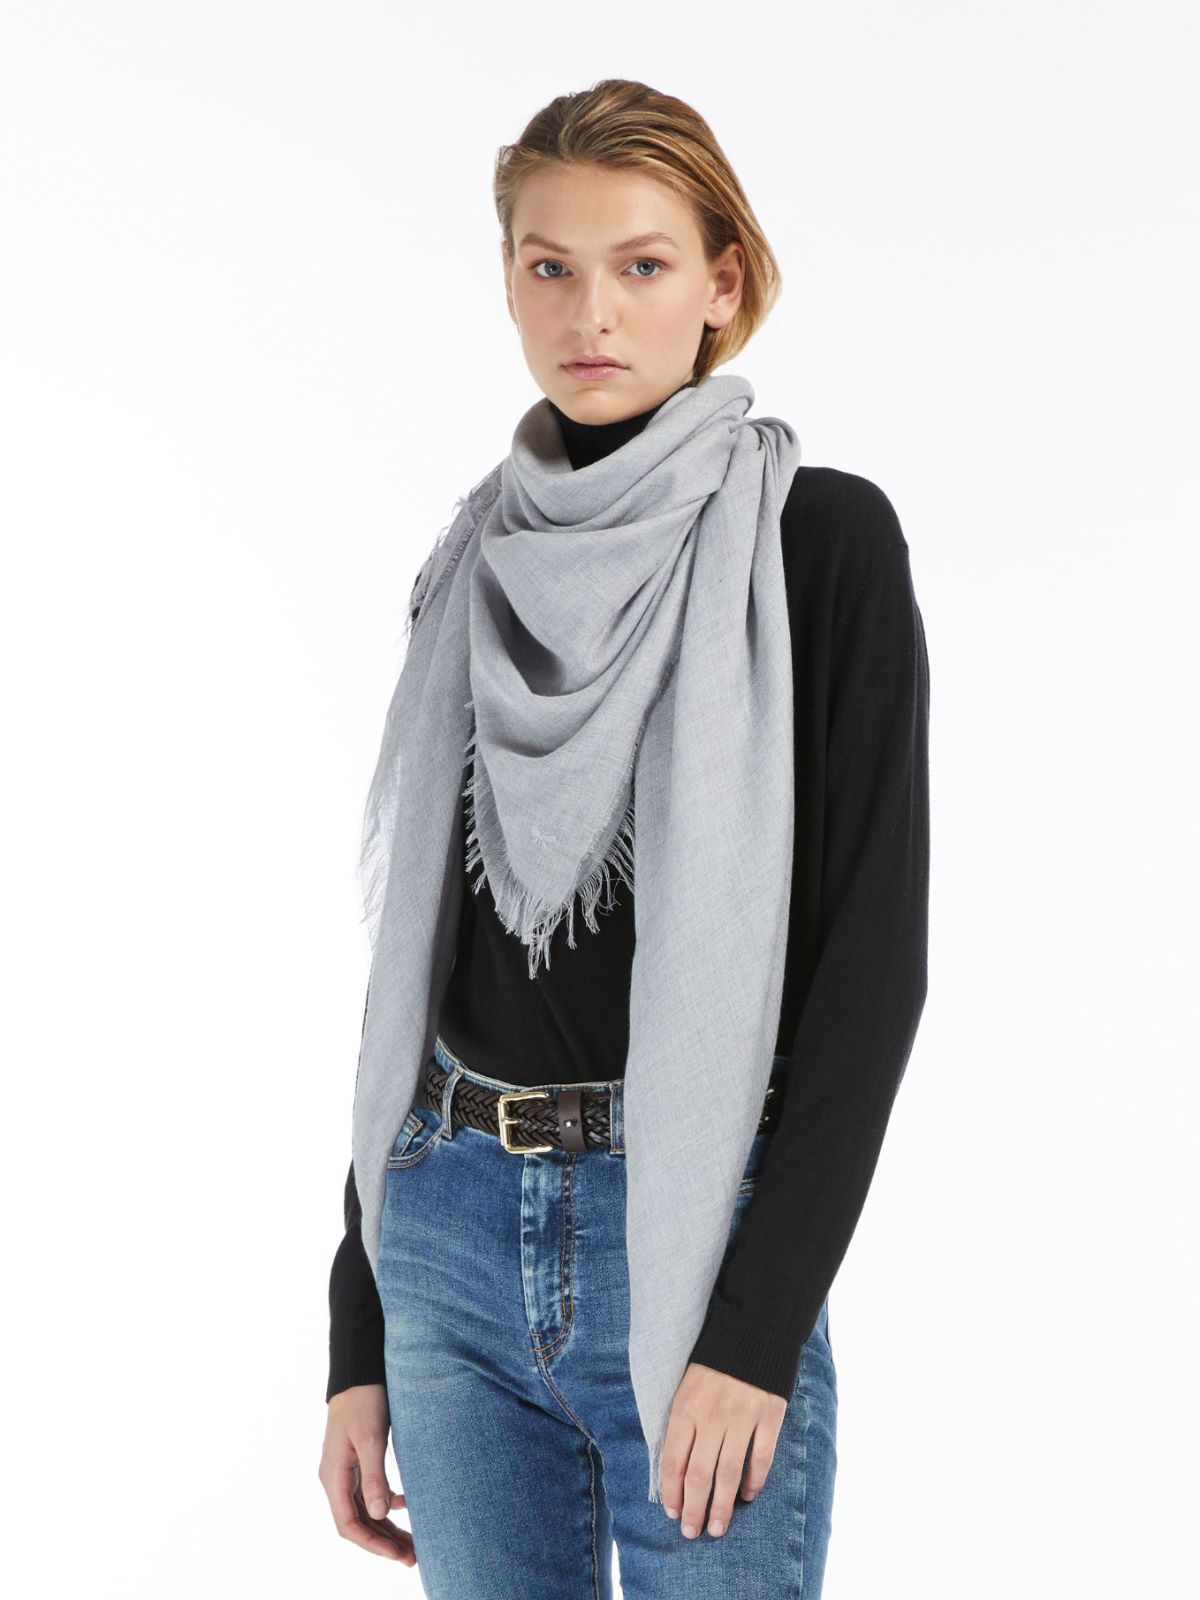 Viscose and cashmere stole - LIGHT GREY - Weekend Max Mara - 3